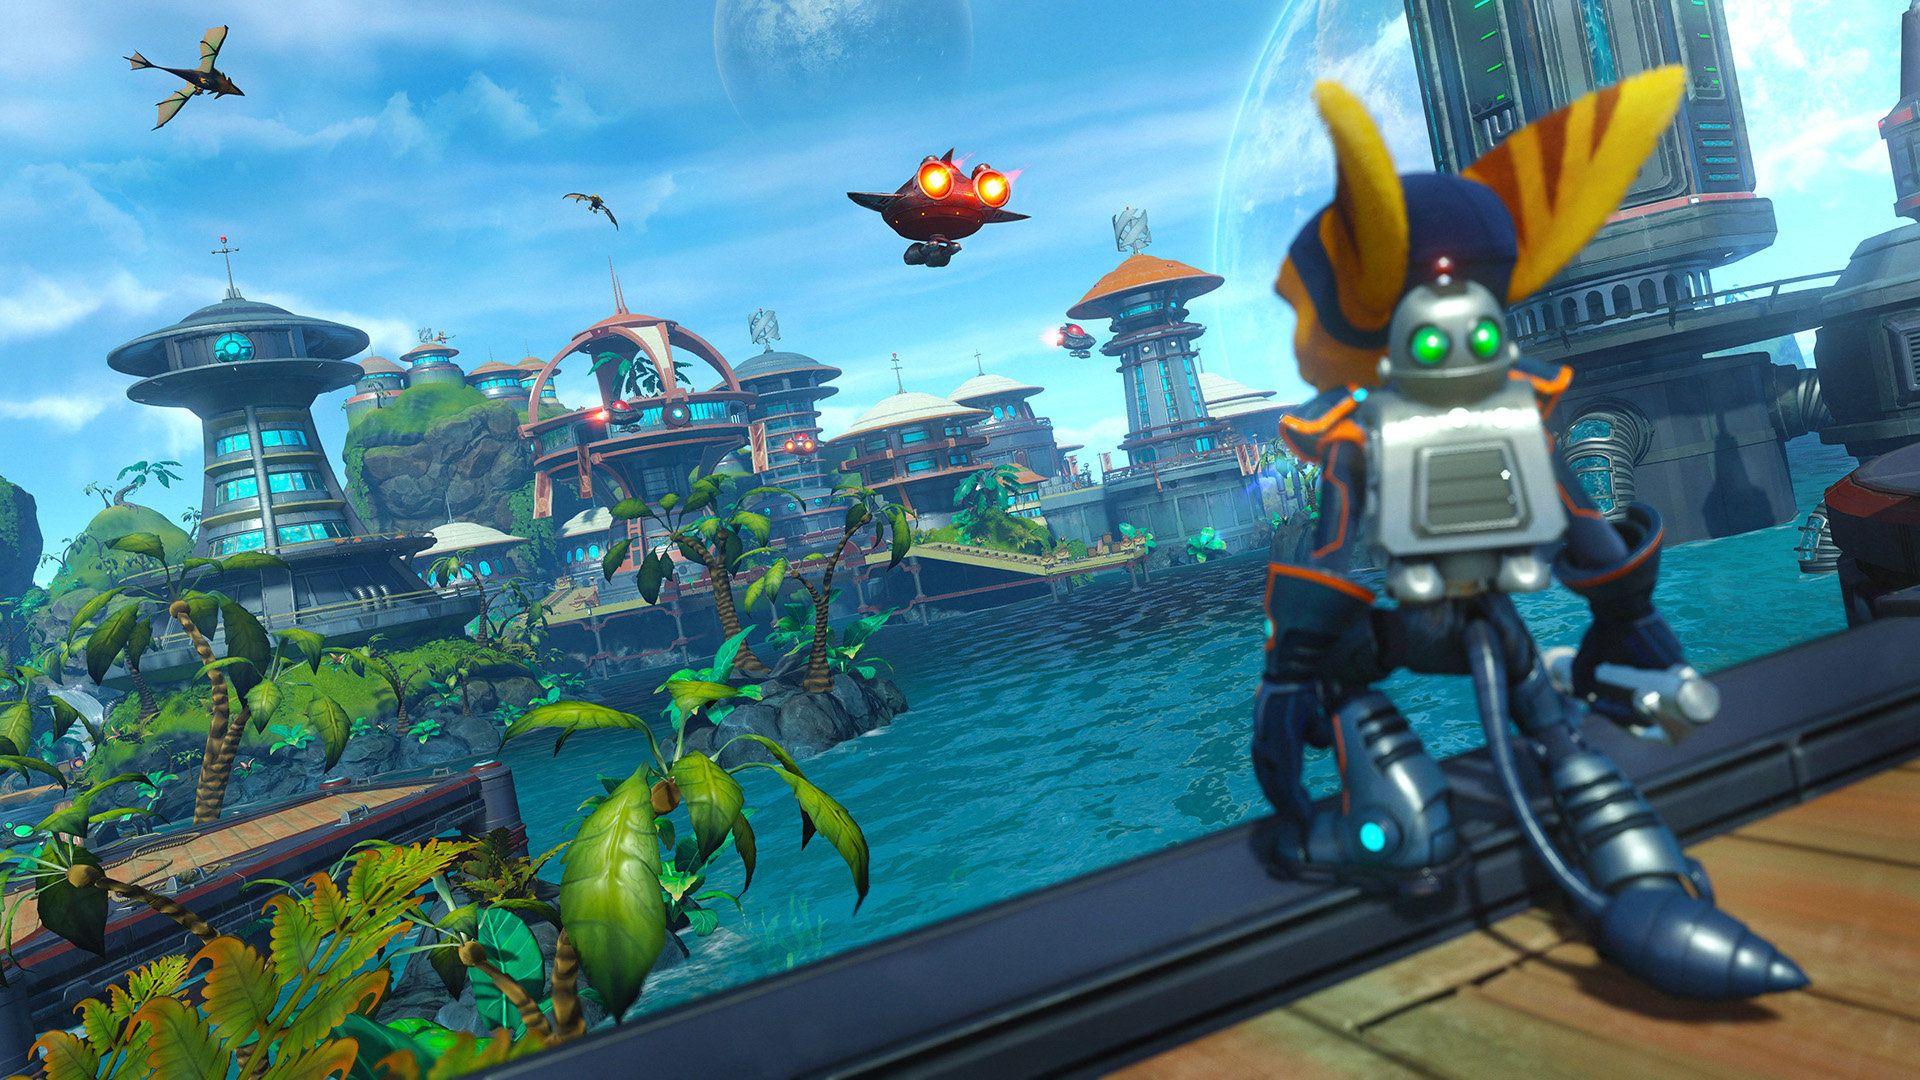 Ripping The Galaxy A New One: A Ratchet and Clank Retrospective